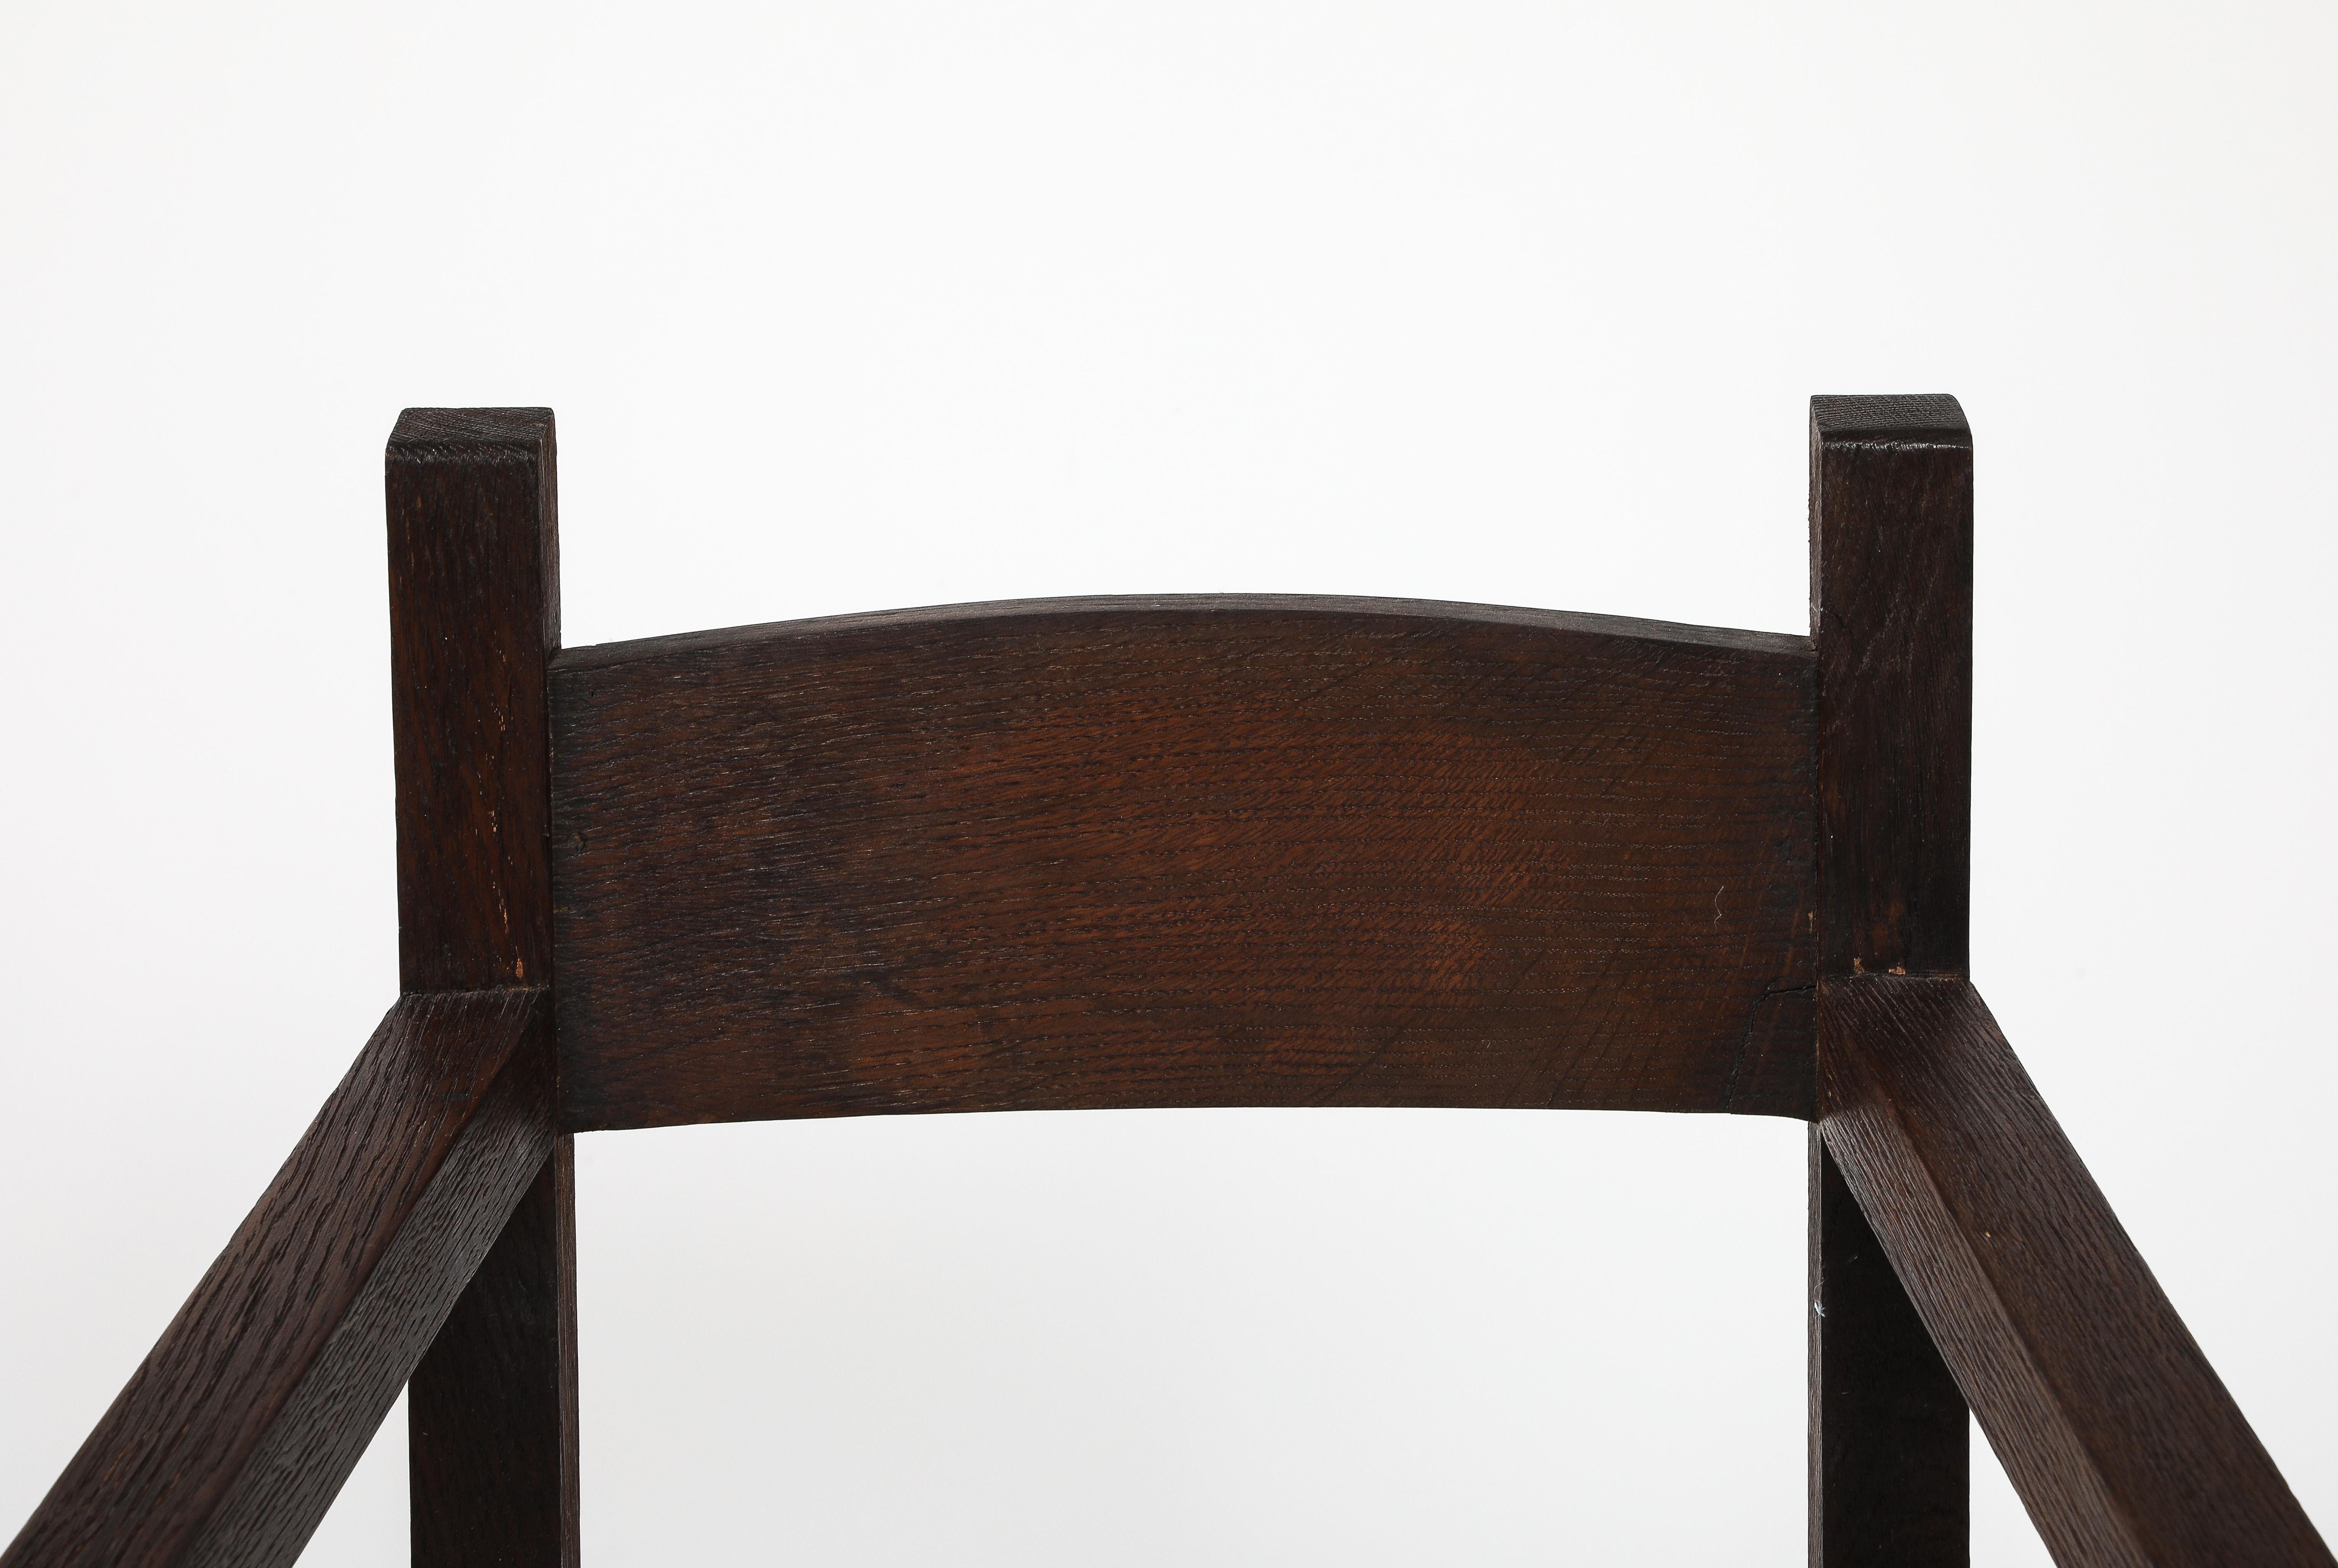 French Pair of Modernist Eyre de Lanux Armchairs in Brushed Oak, France, c. 1925